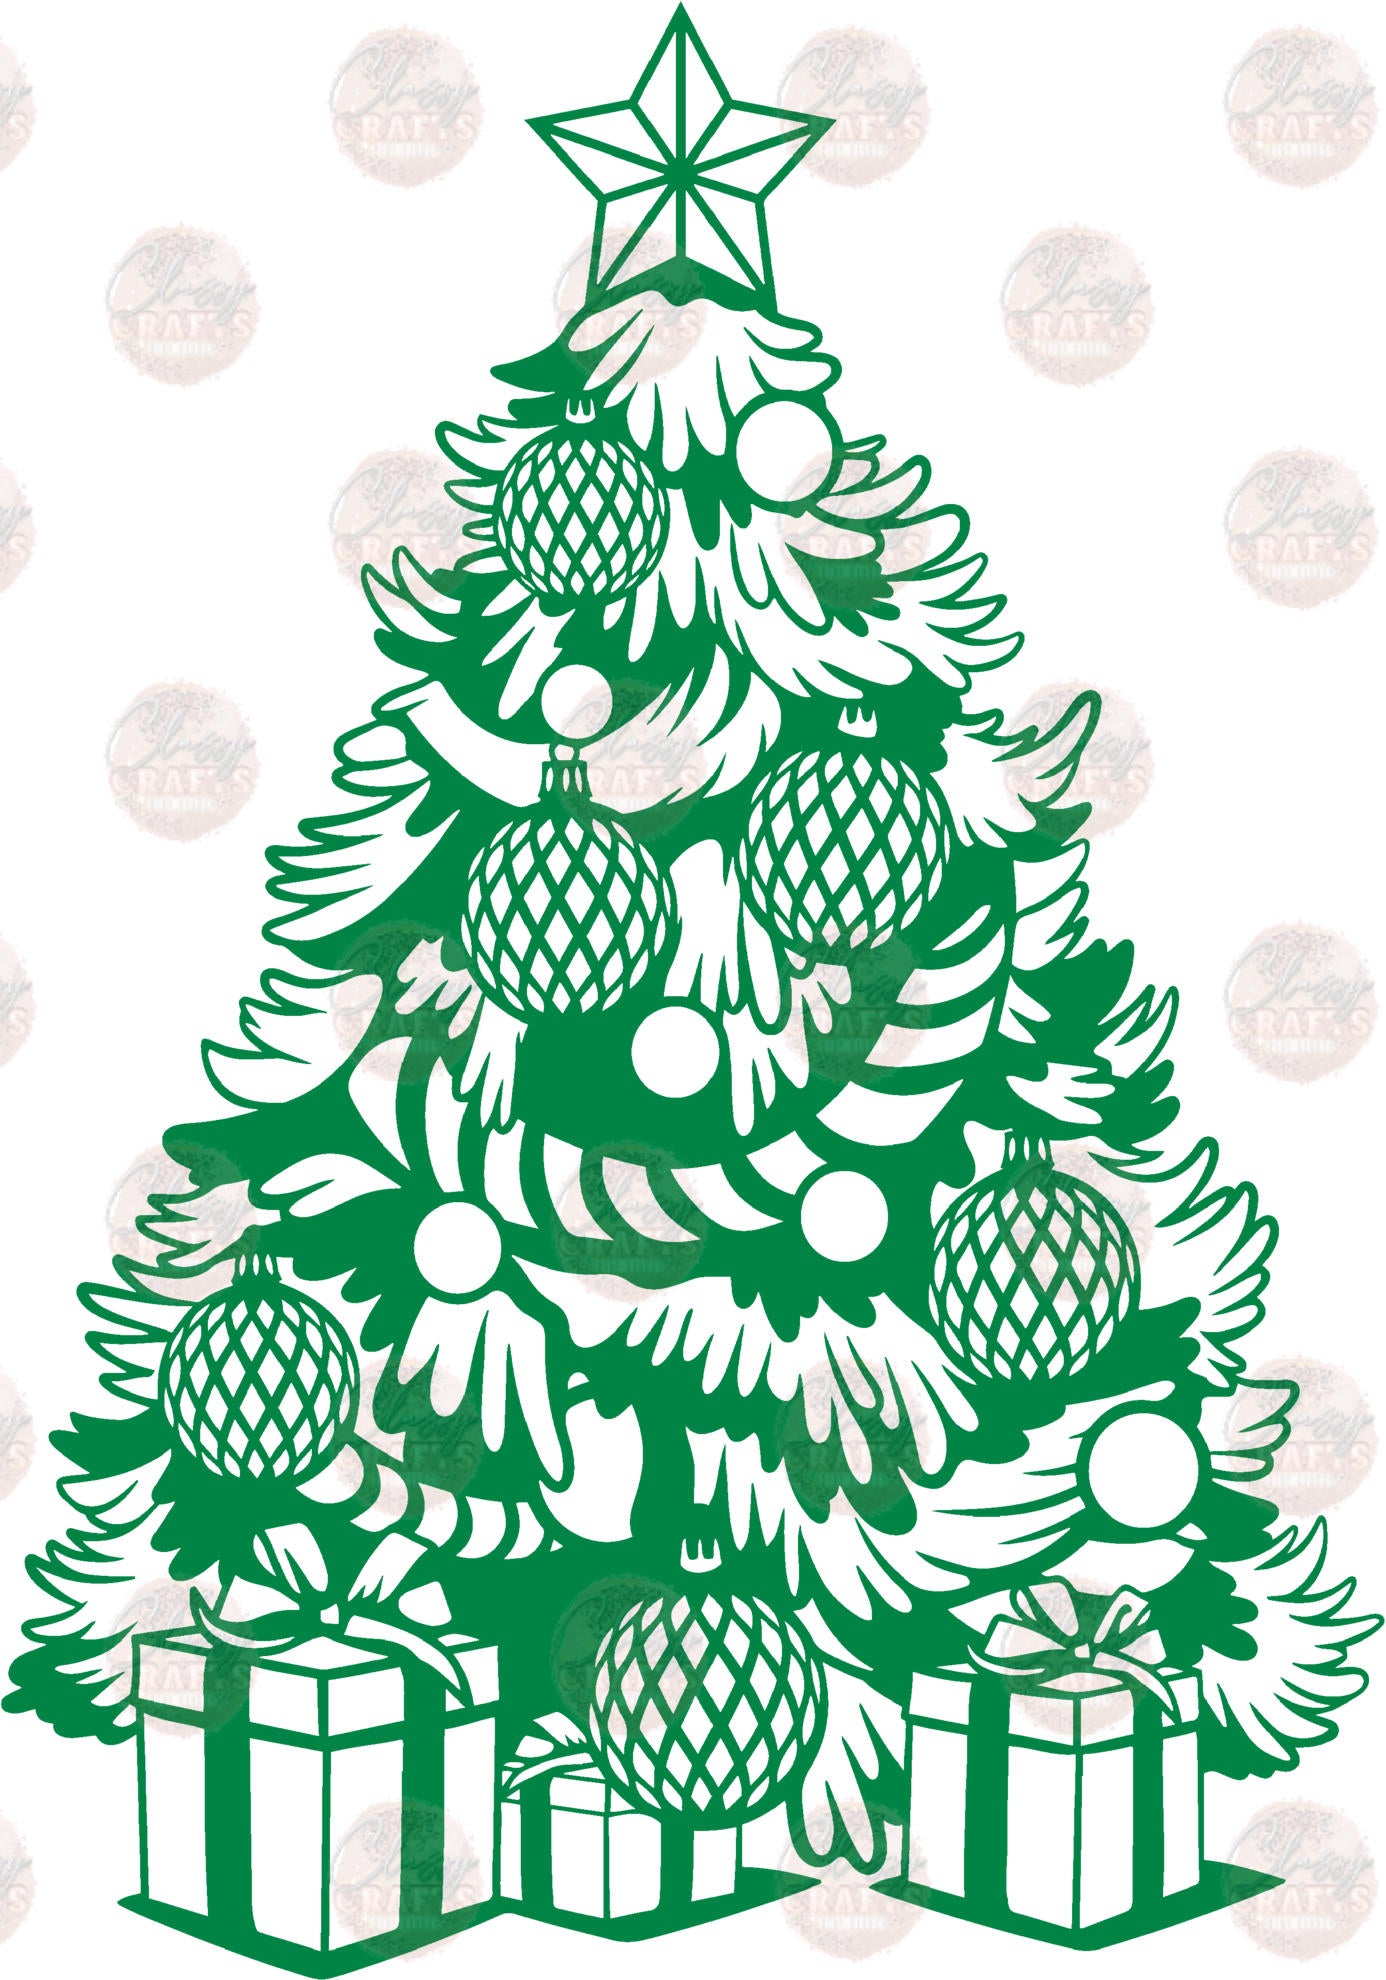 Green Christmas Tree & Gifts - Sublimation Transfers